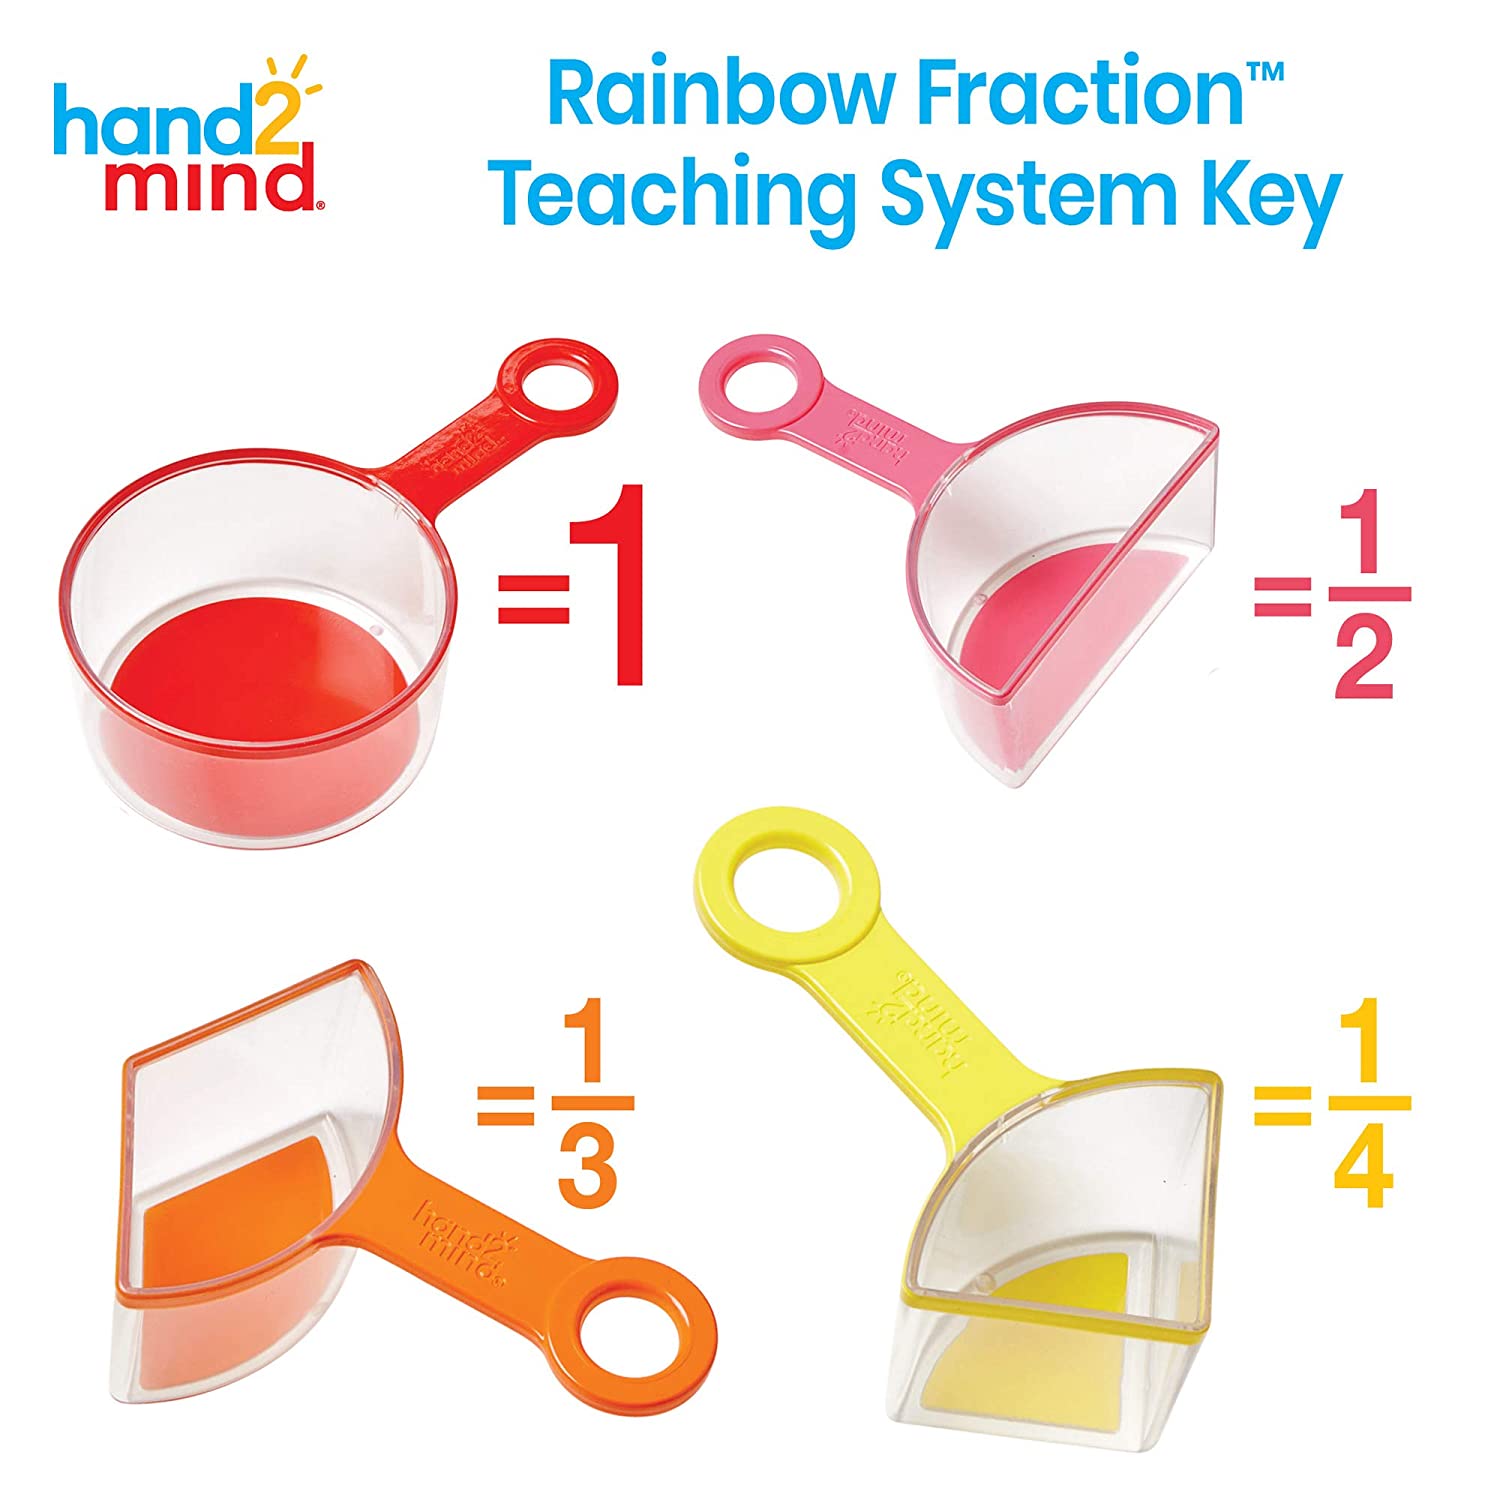 Red outlined 1 cup, pink outlined 1/2 cup, orange outlined 1/3 cup, and yellow outlined 1/4 cup Visual Measuring Cups of 'hand2mind'